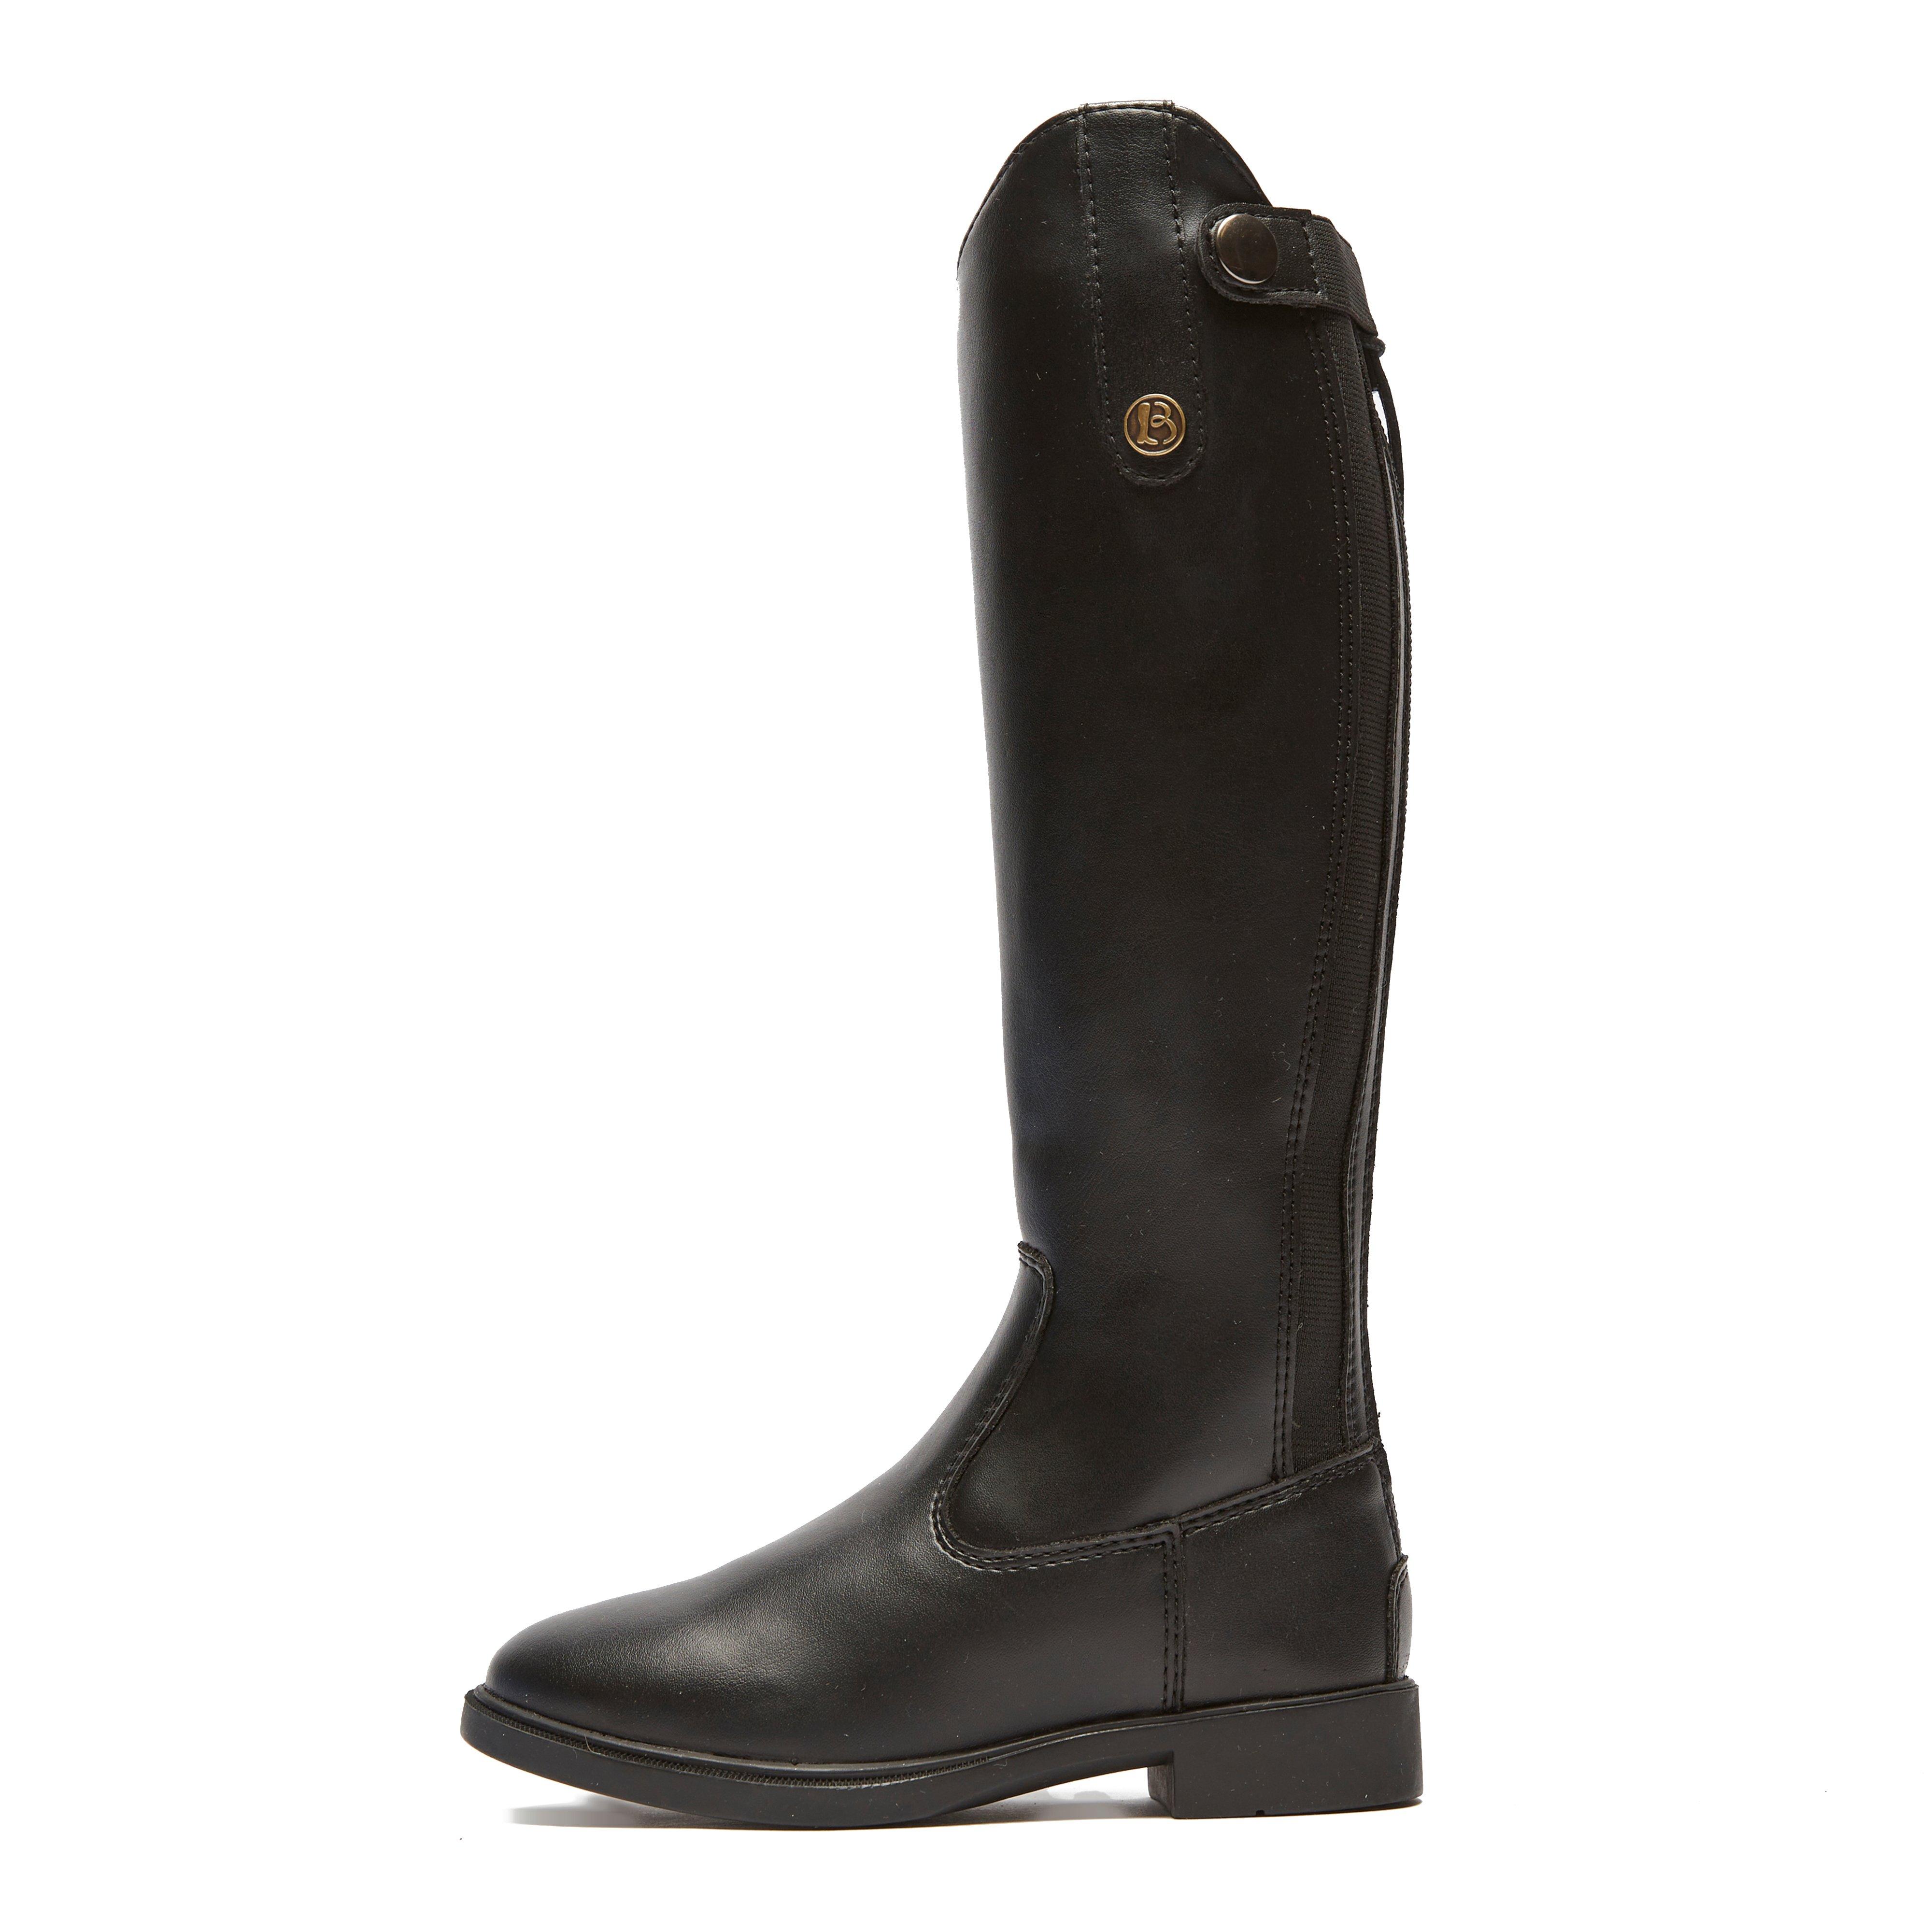 Best long leather riding boots for every budget